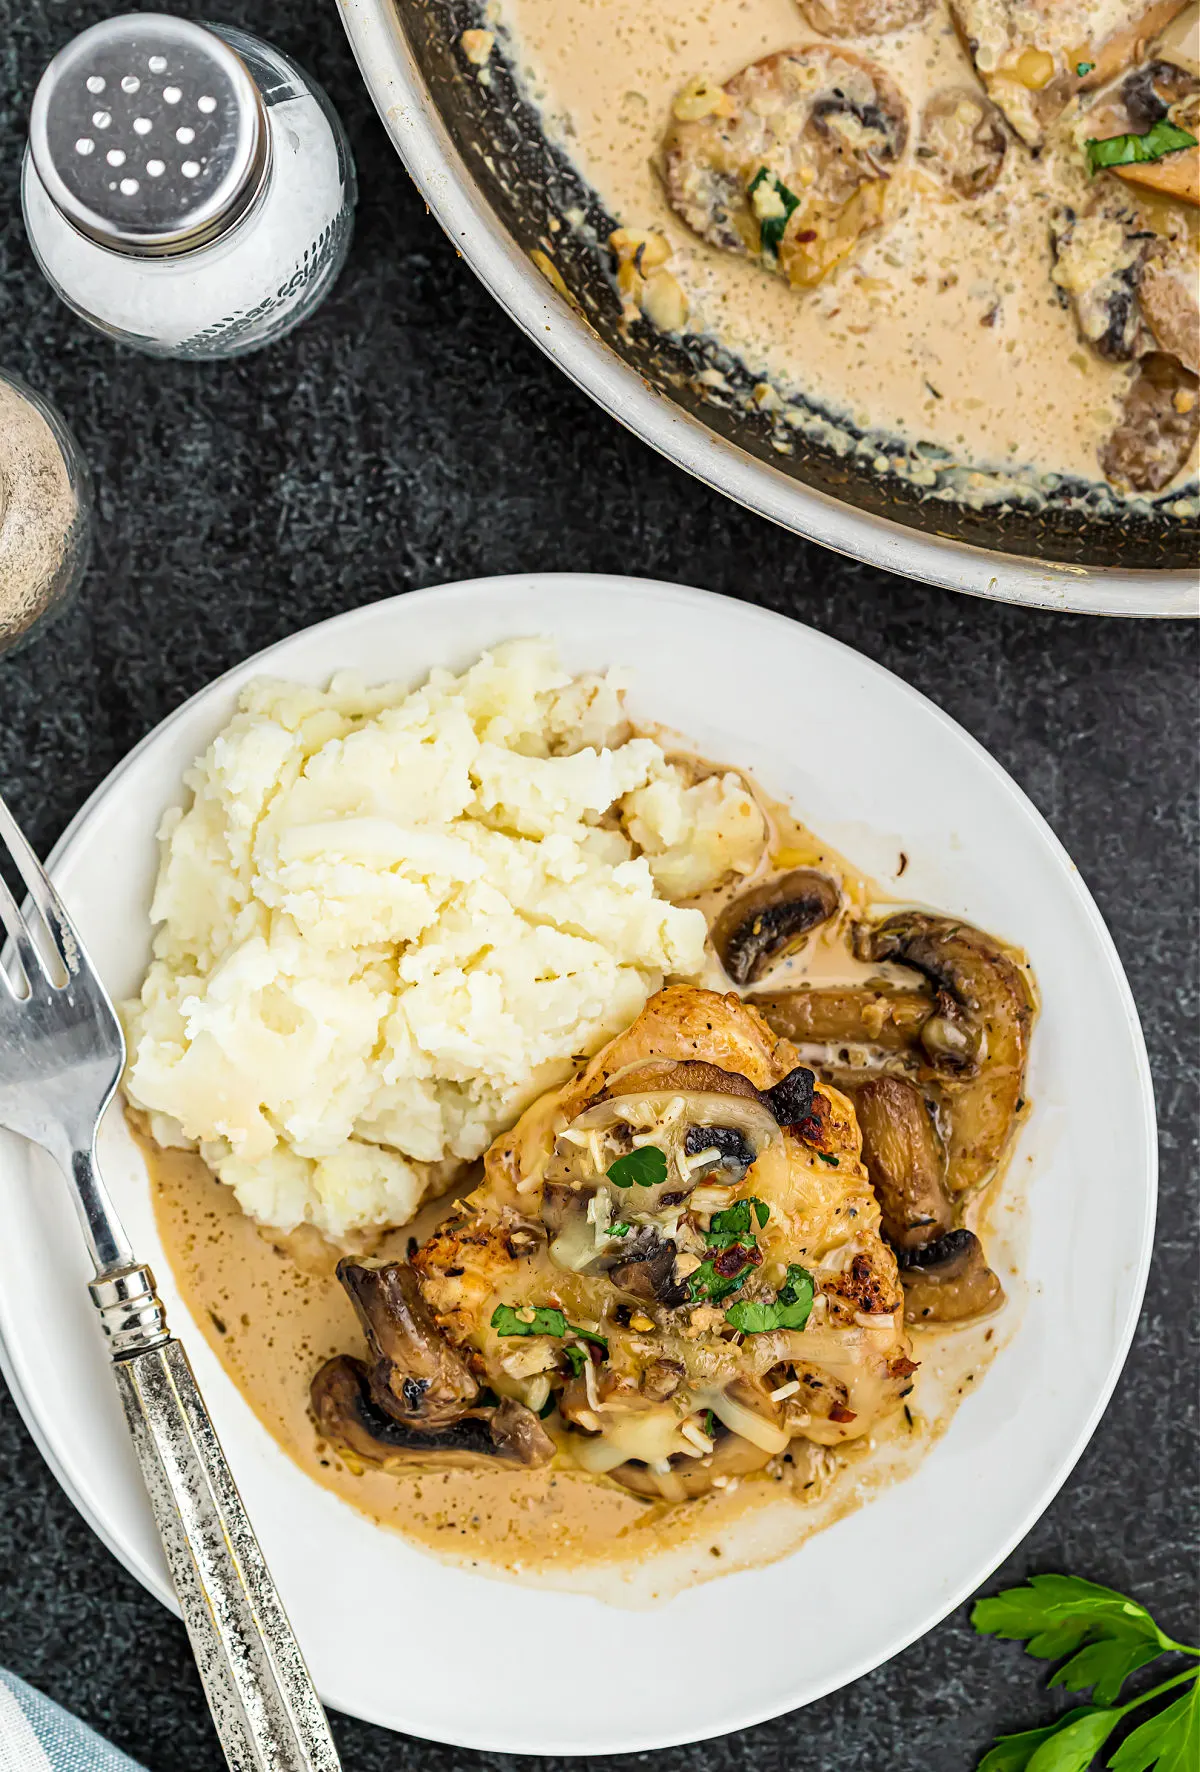 Chicken and mushrooms served on a white plate with cauliflower mash.